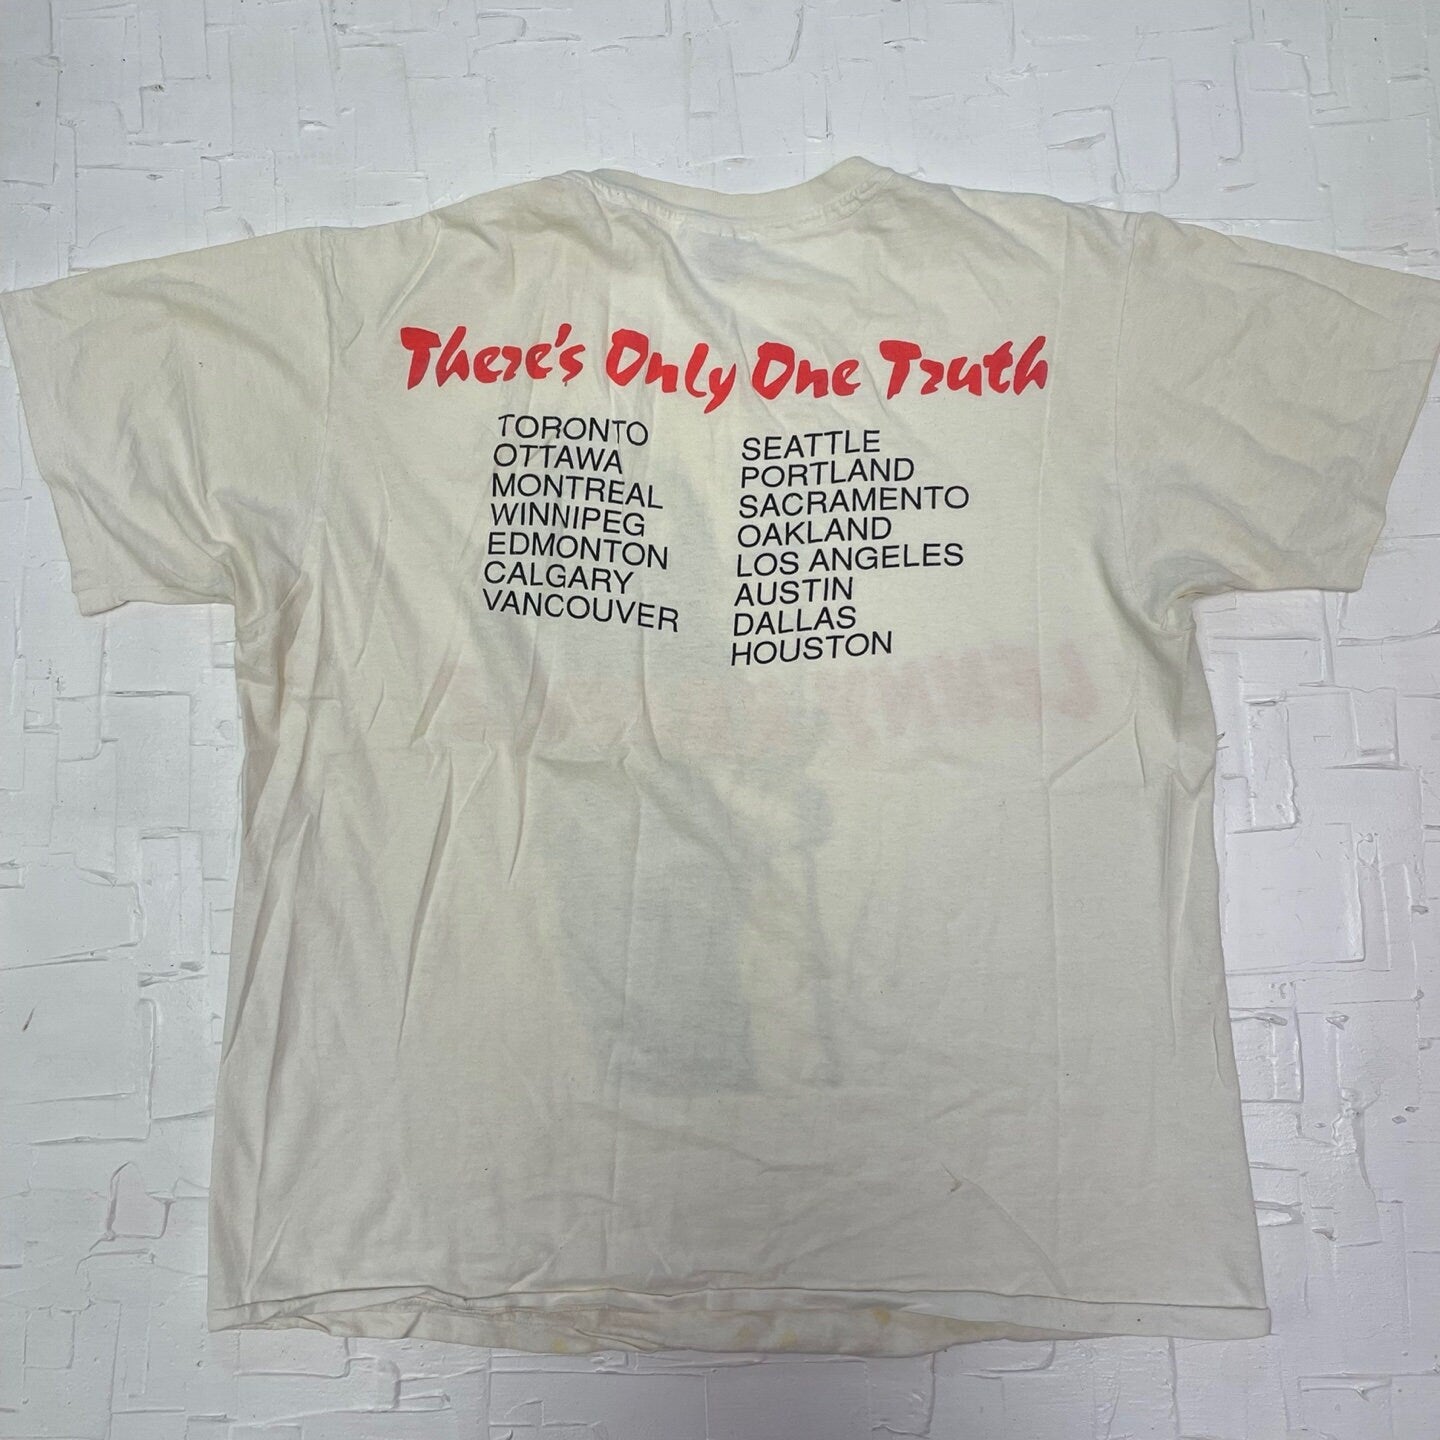 1991 Lenny Kravitz "There's Only One Truth" Tour T-Shirt | Vintage T-Shirt| Lenny Kravitz T-Shirt | Single Stitch | Size XL | SKU: M-1525